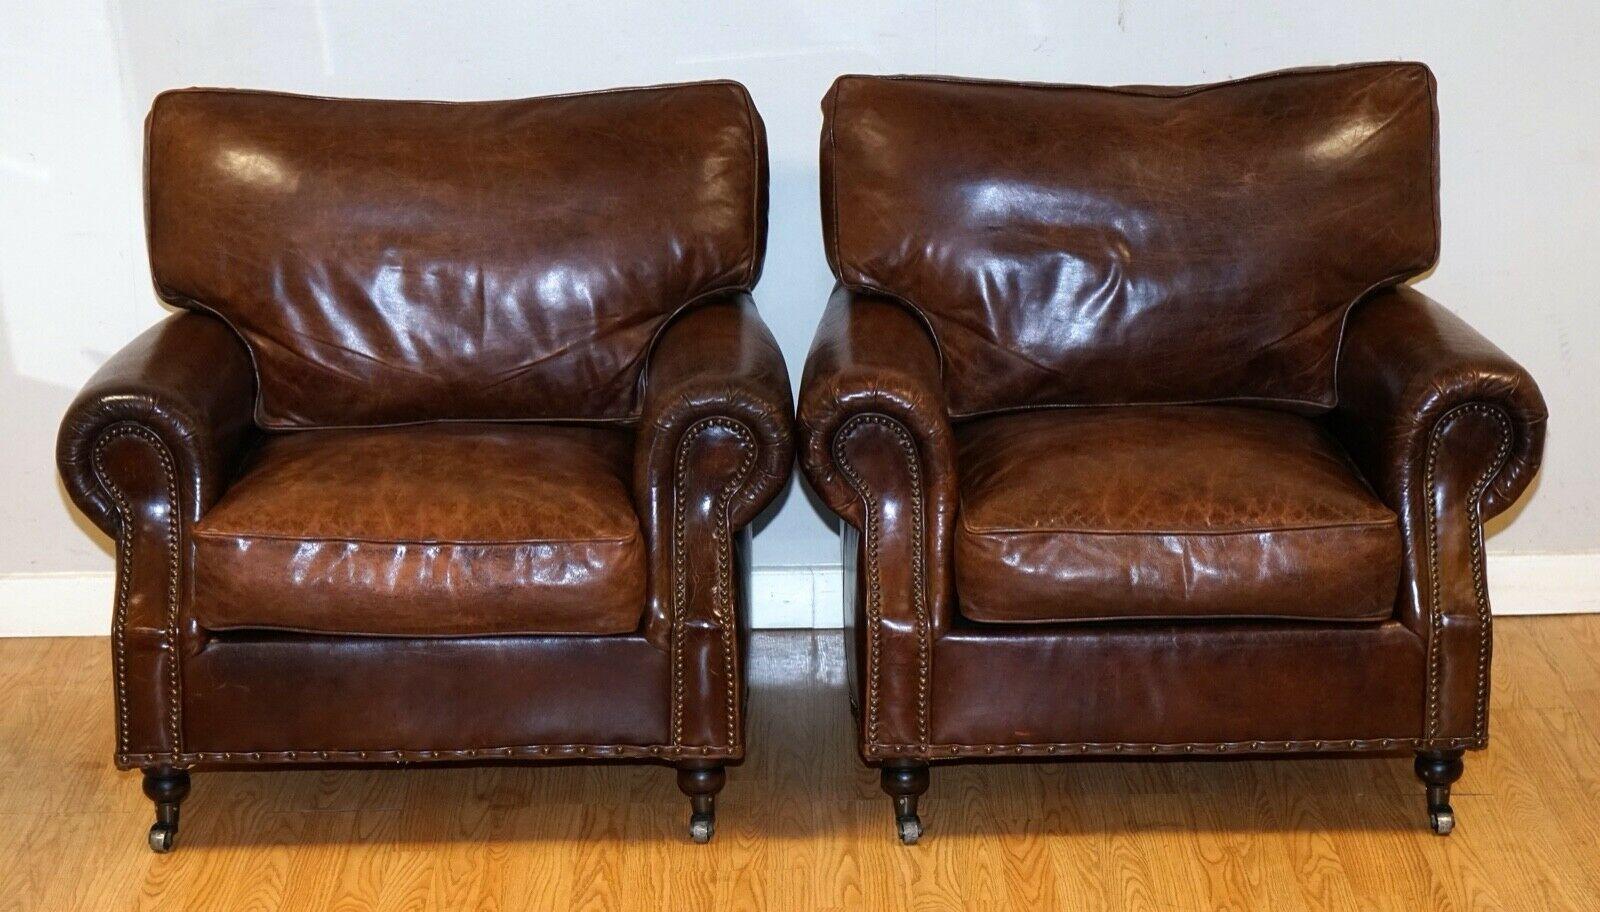 We are delighted to sell these stunning pair of Timothy Oulton armchairs.
A fantastic and very well made pair with a unique vintage look. 
We also have a matching sofa for sale.

We have lightly restored this by giving it a hand clean all over,